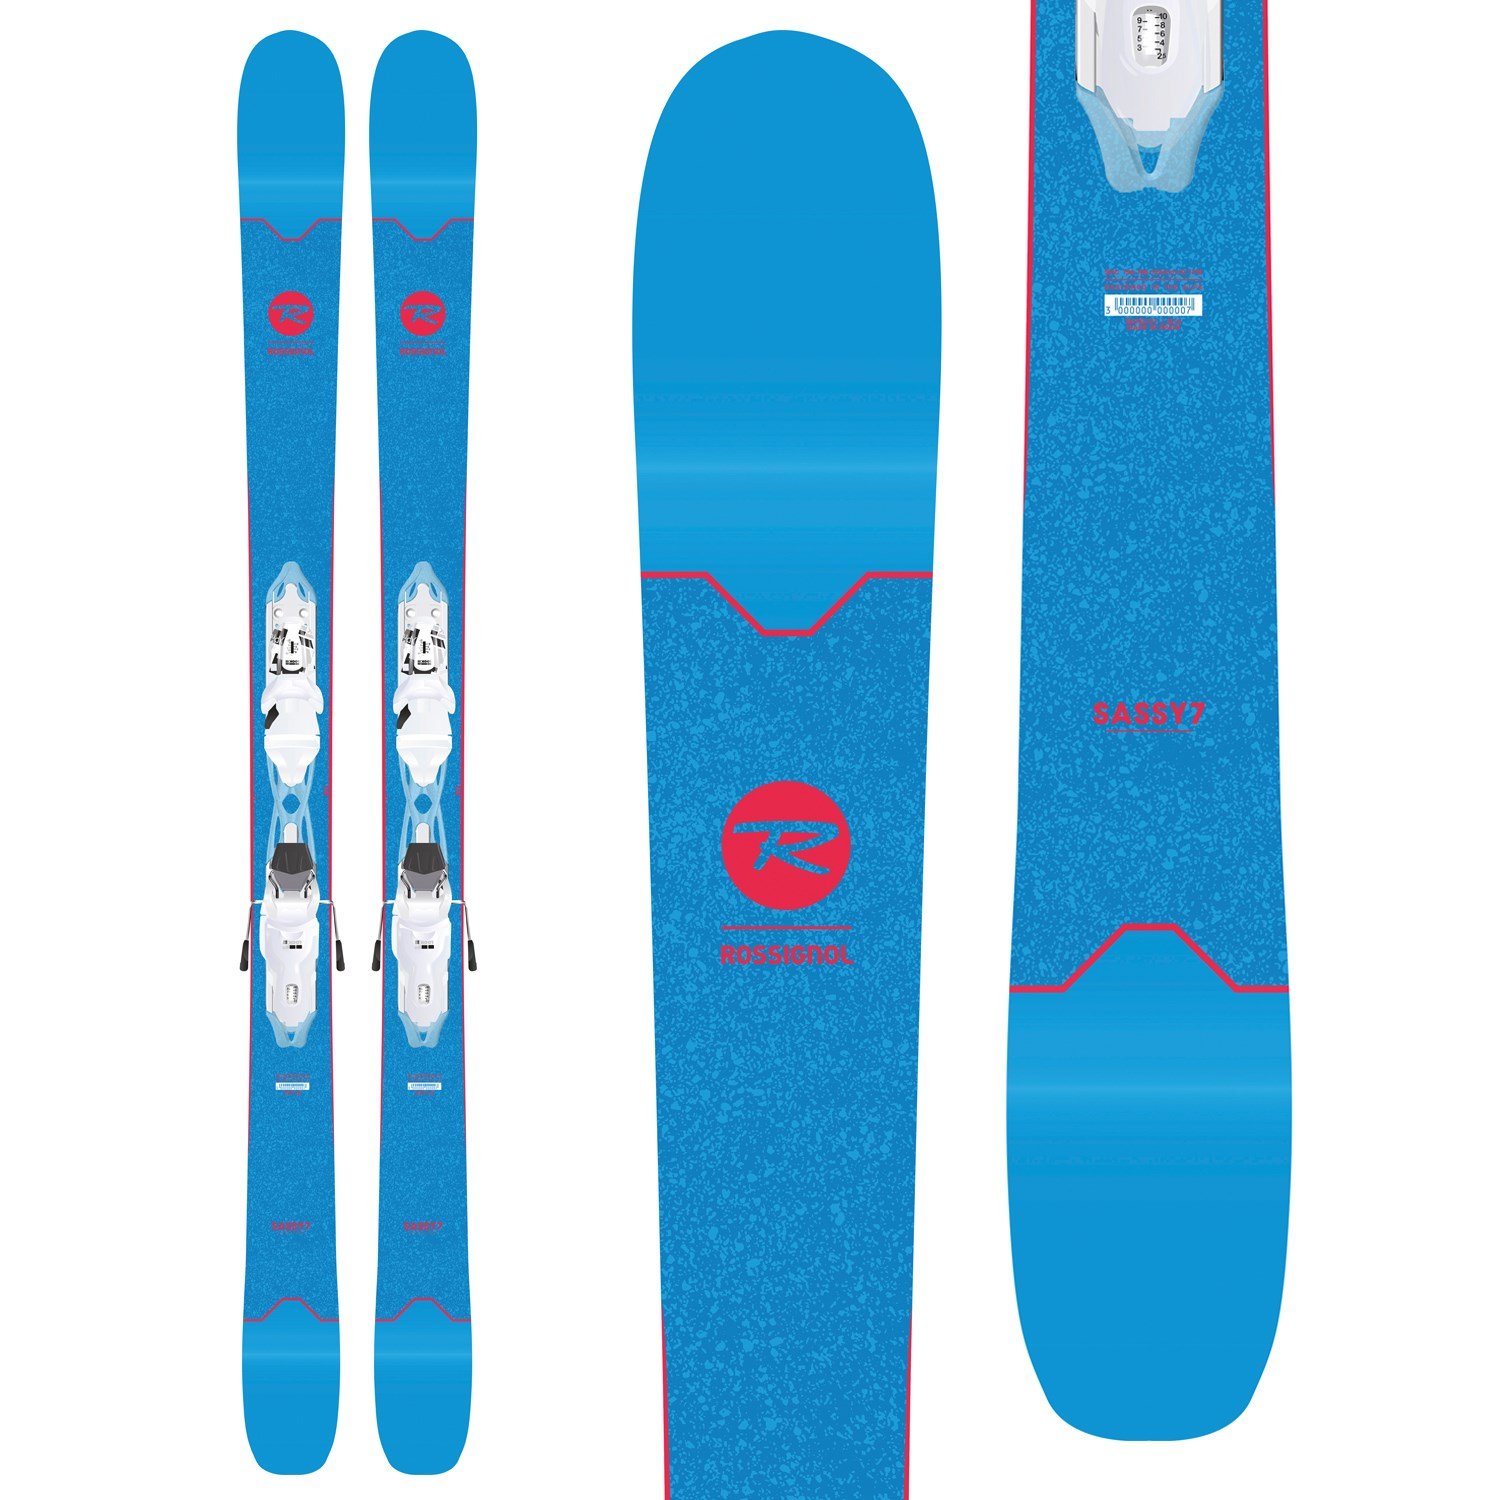 limited quantities! NEW 2019 Rossignol Seek 7 HD with integrated bindings 